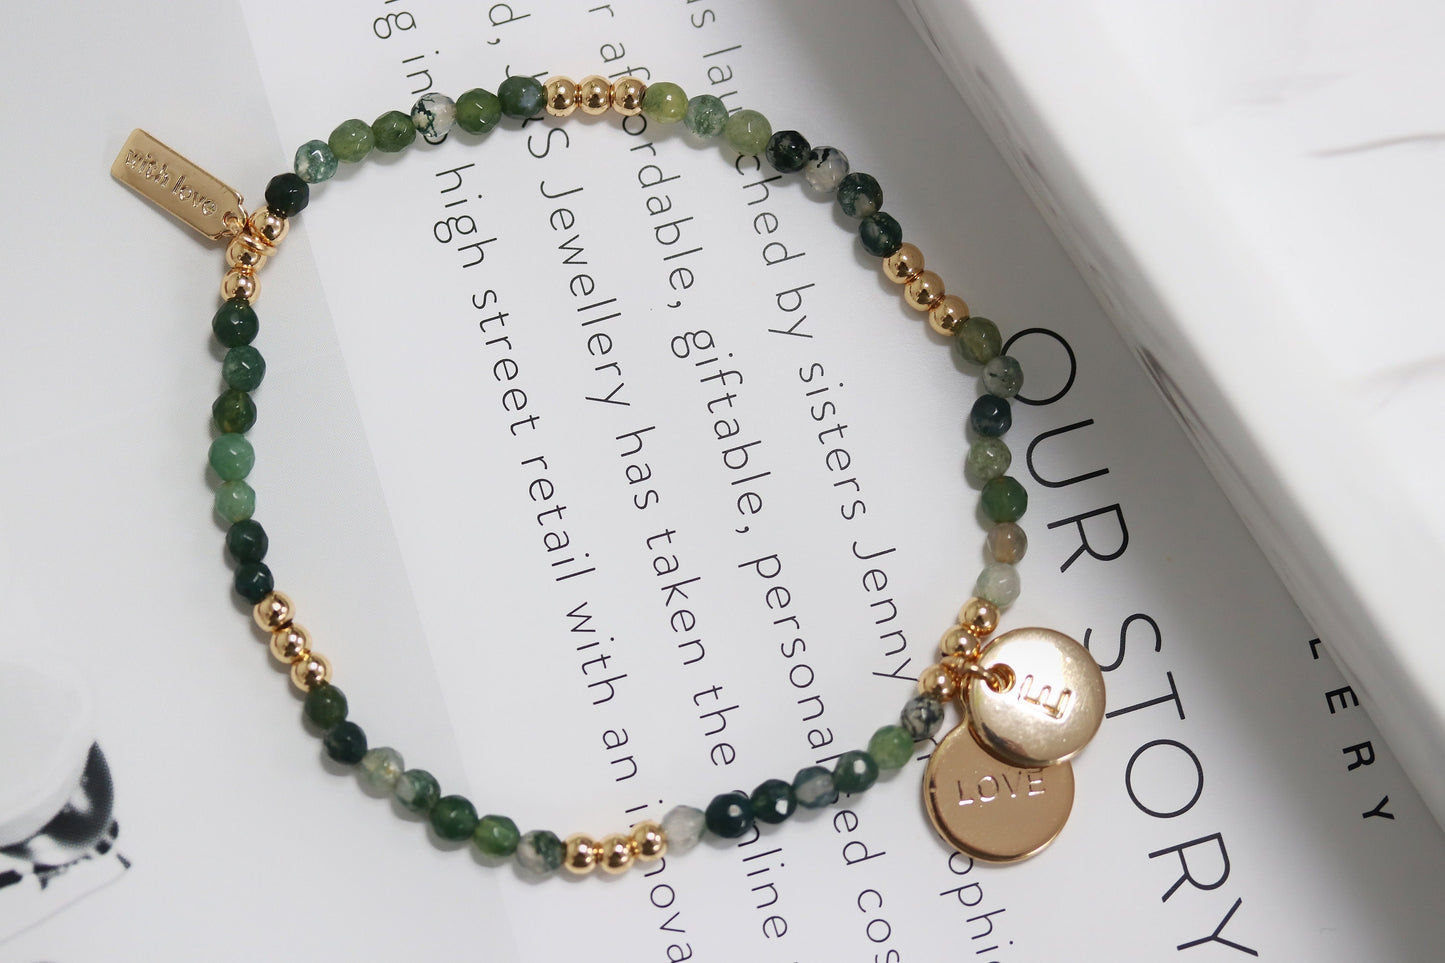 Personalised Auntie Bracelet, Initial Charm Bracelet, Gold Emerald Beads Bangle, Stackable Gemstone Bracelet, Auntie Birthday Gift for Her